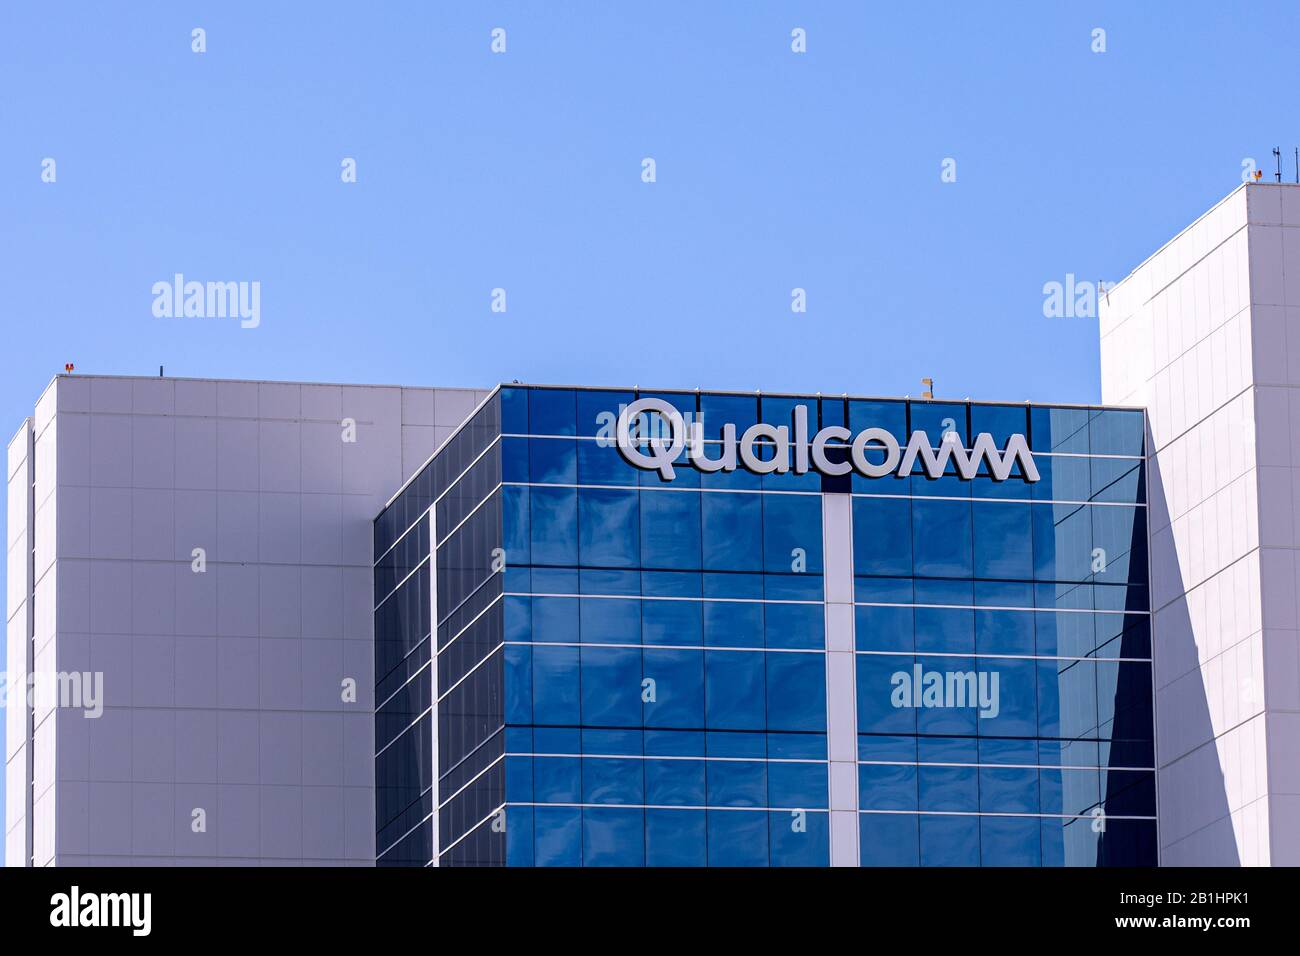 San Diego, California  USA - 06 September 2019: Sign and logo of Qualcomm company on a side of a building Stock Photo